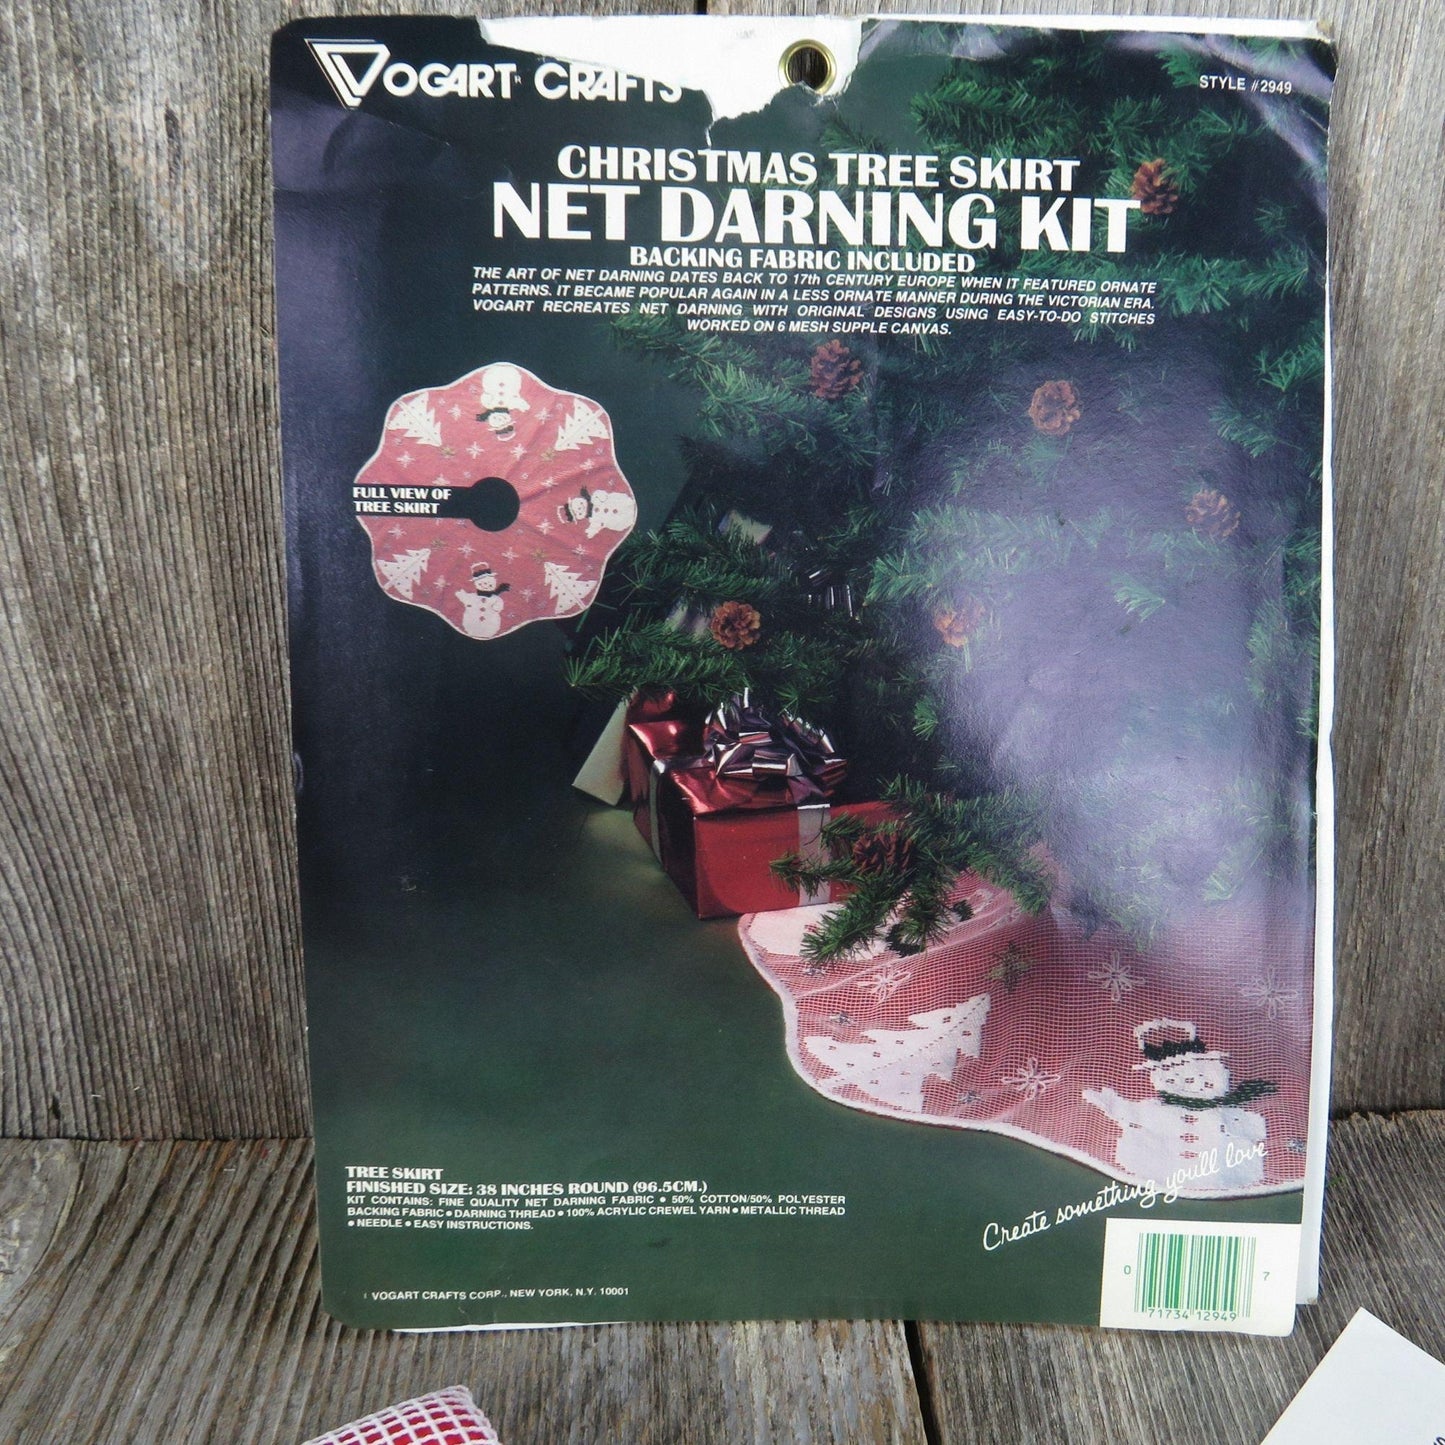 Vintage Christmas Tree Skirt Lace Net Darning Kit Snowman Vogart Crafts 2944 Filet Lace Embroidery Craft Kit White Red